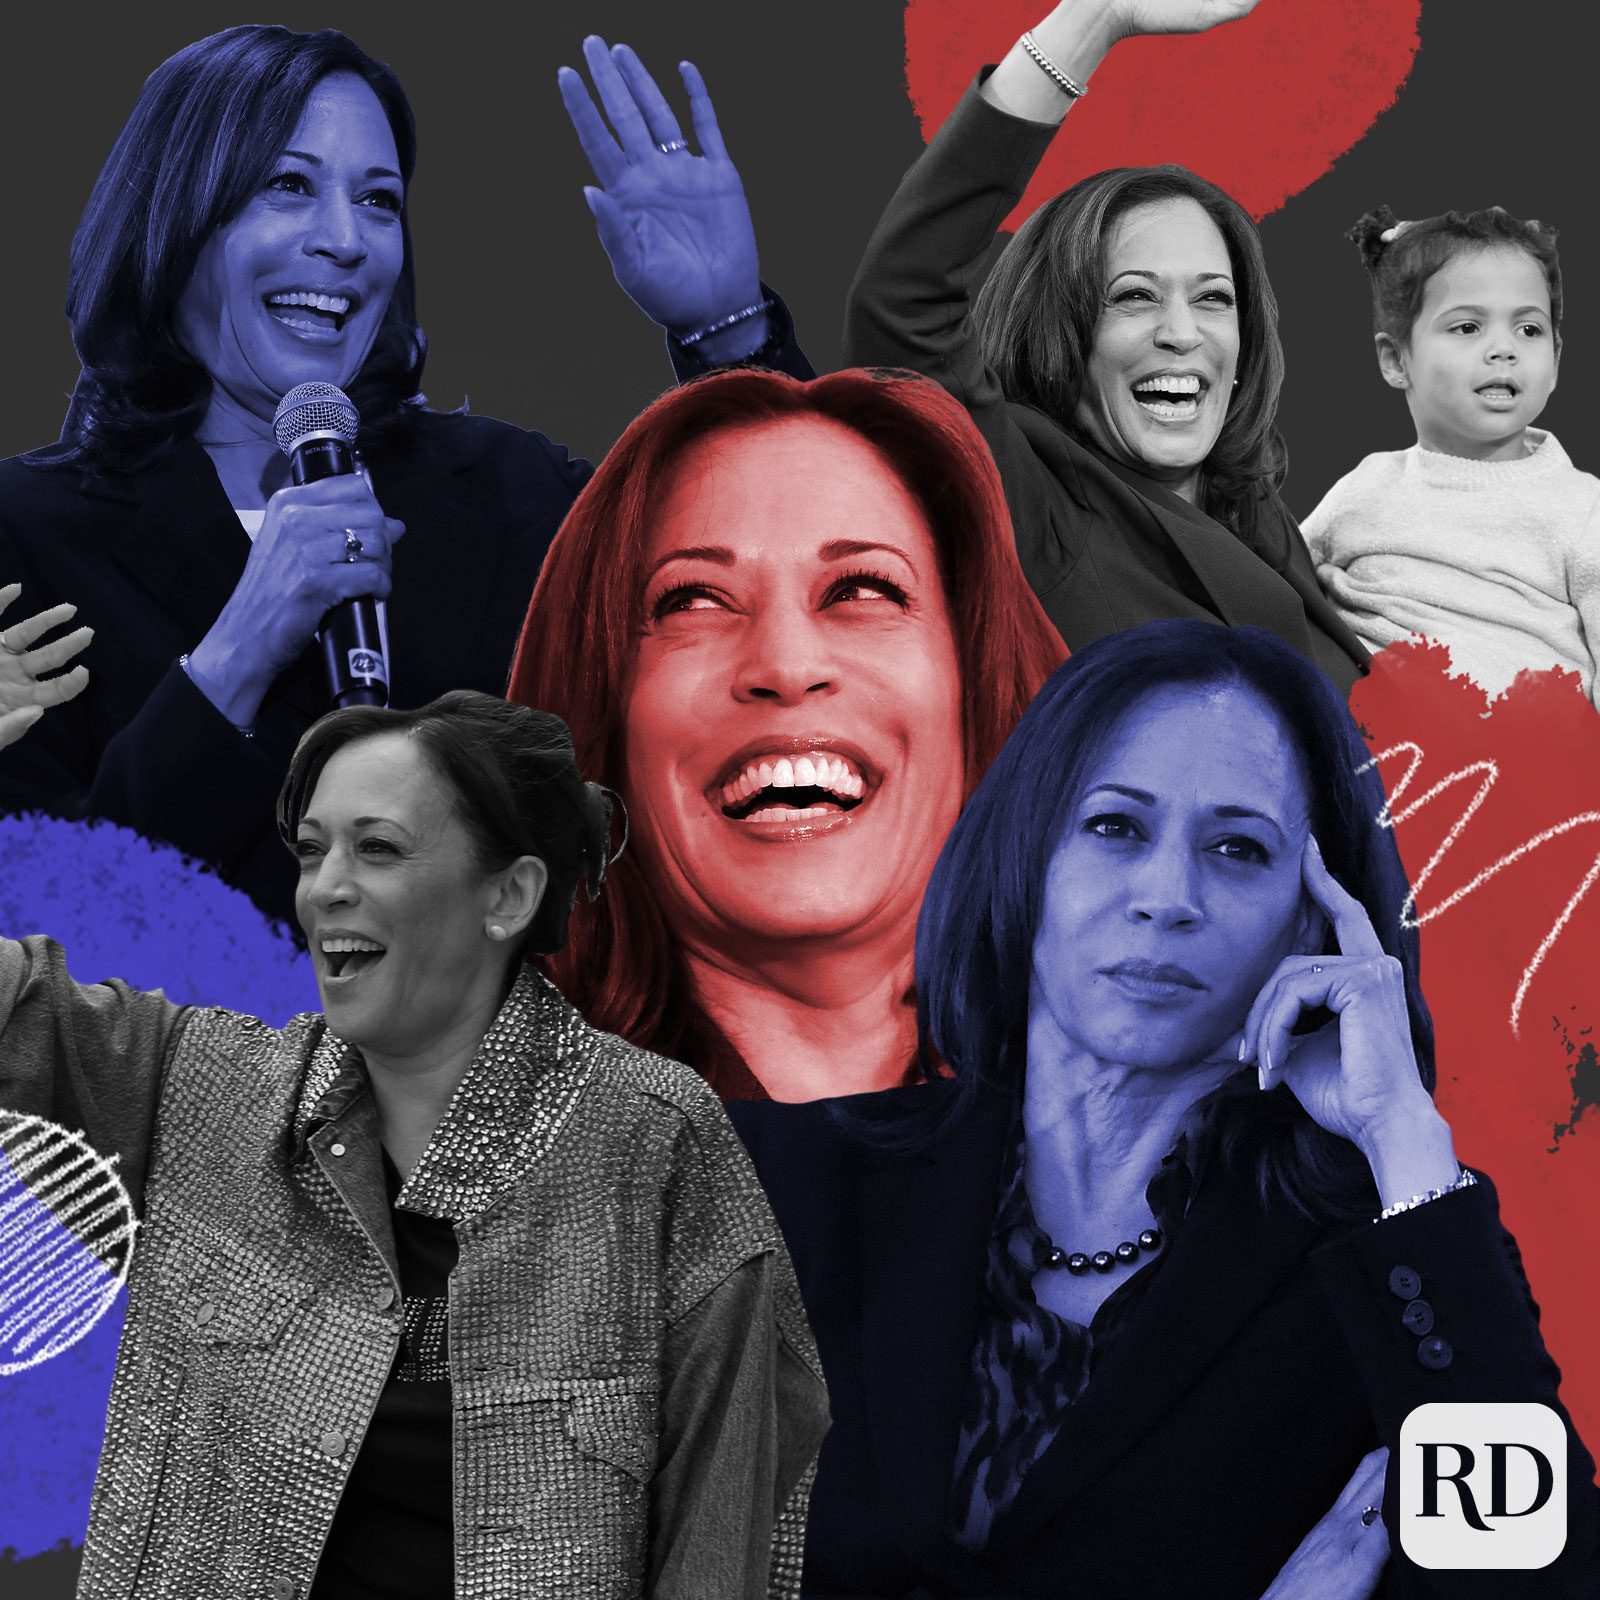 Collage of various images from Kamala Harris' career